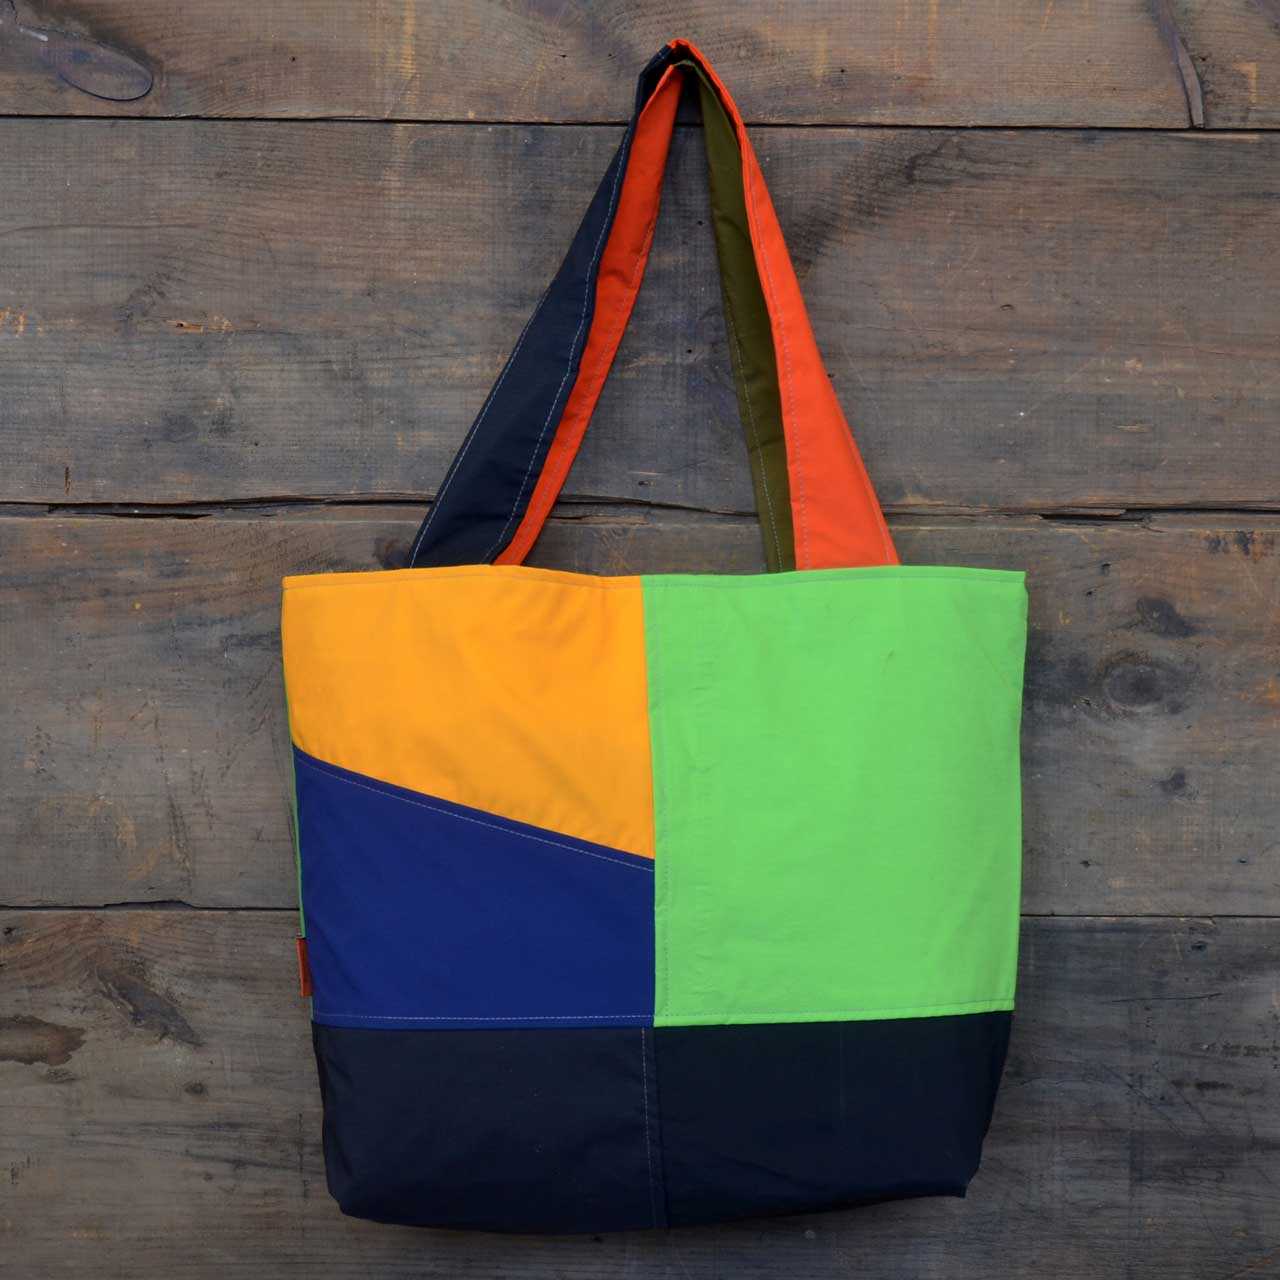 Limited edition “Patchwork” - Favorite Reusable Tote Bag